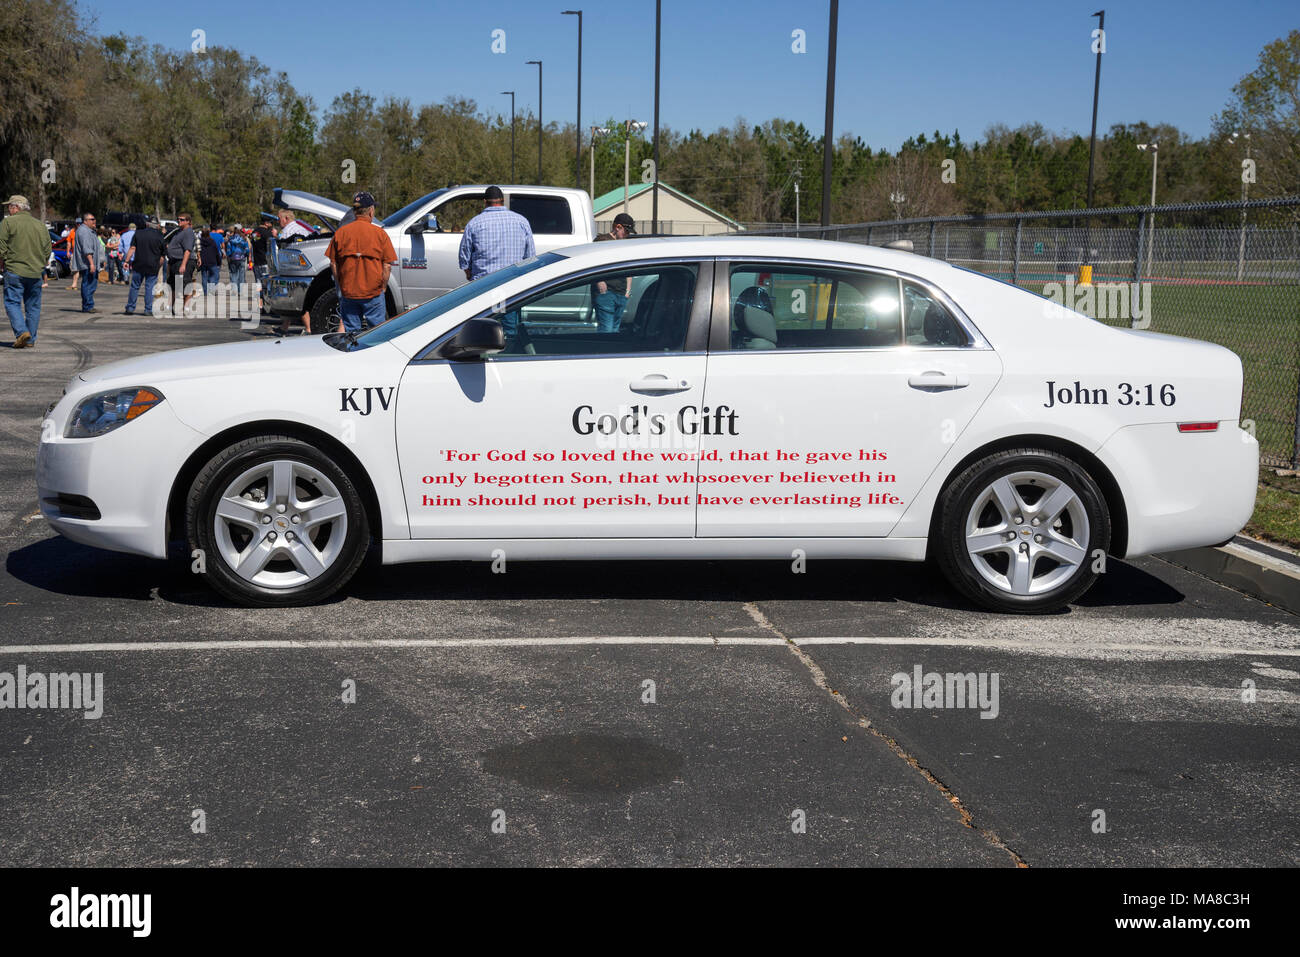 Car Show in Ft. White, Florida. Car with John 3:16 Bible verse on side. Stock Photo